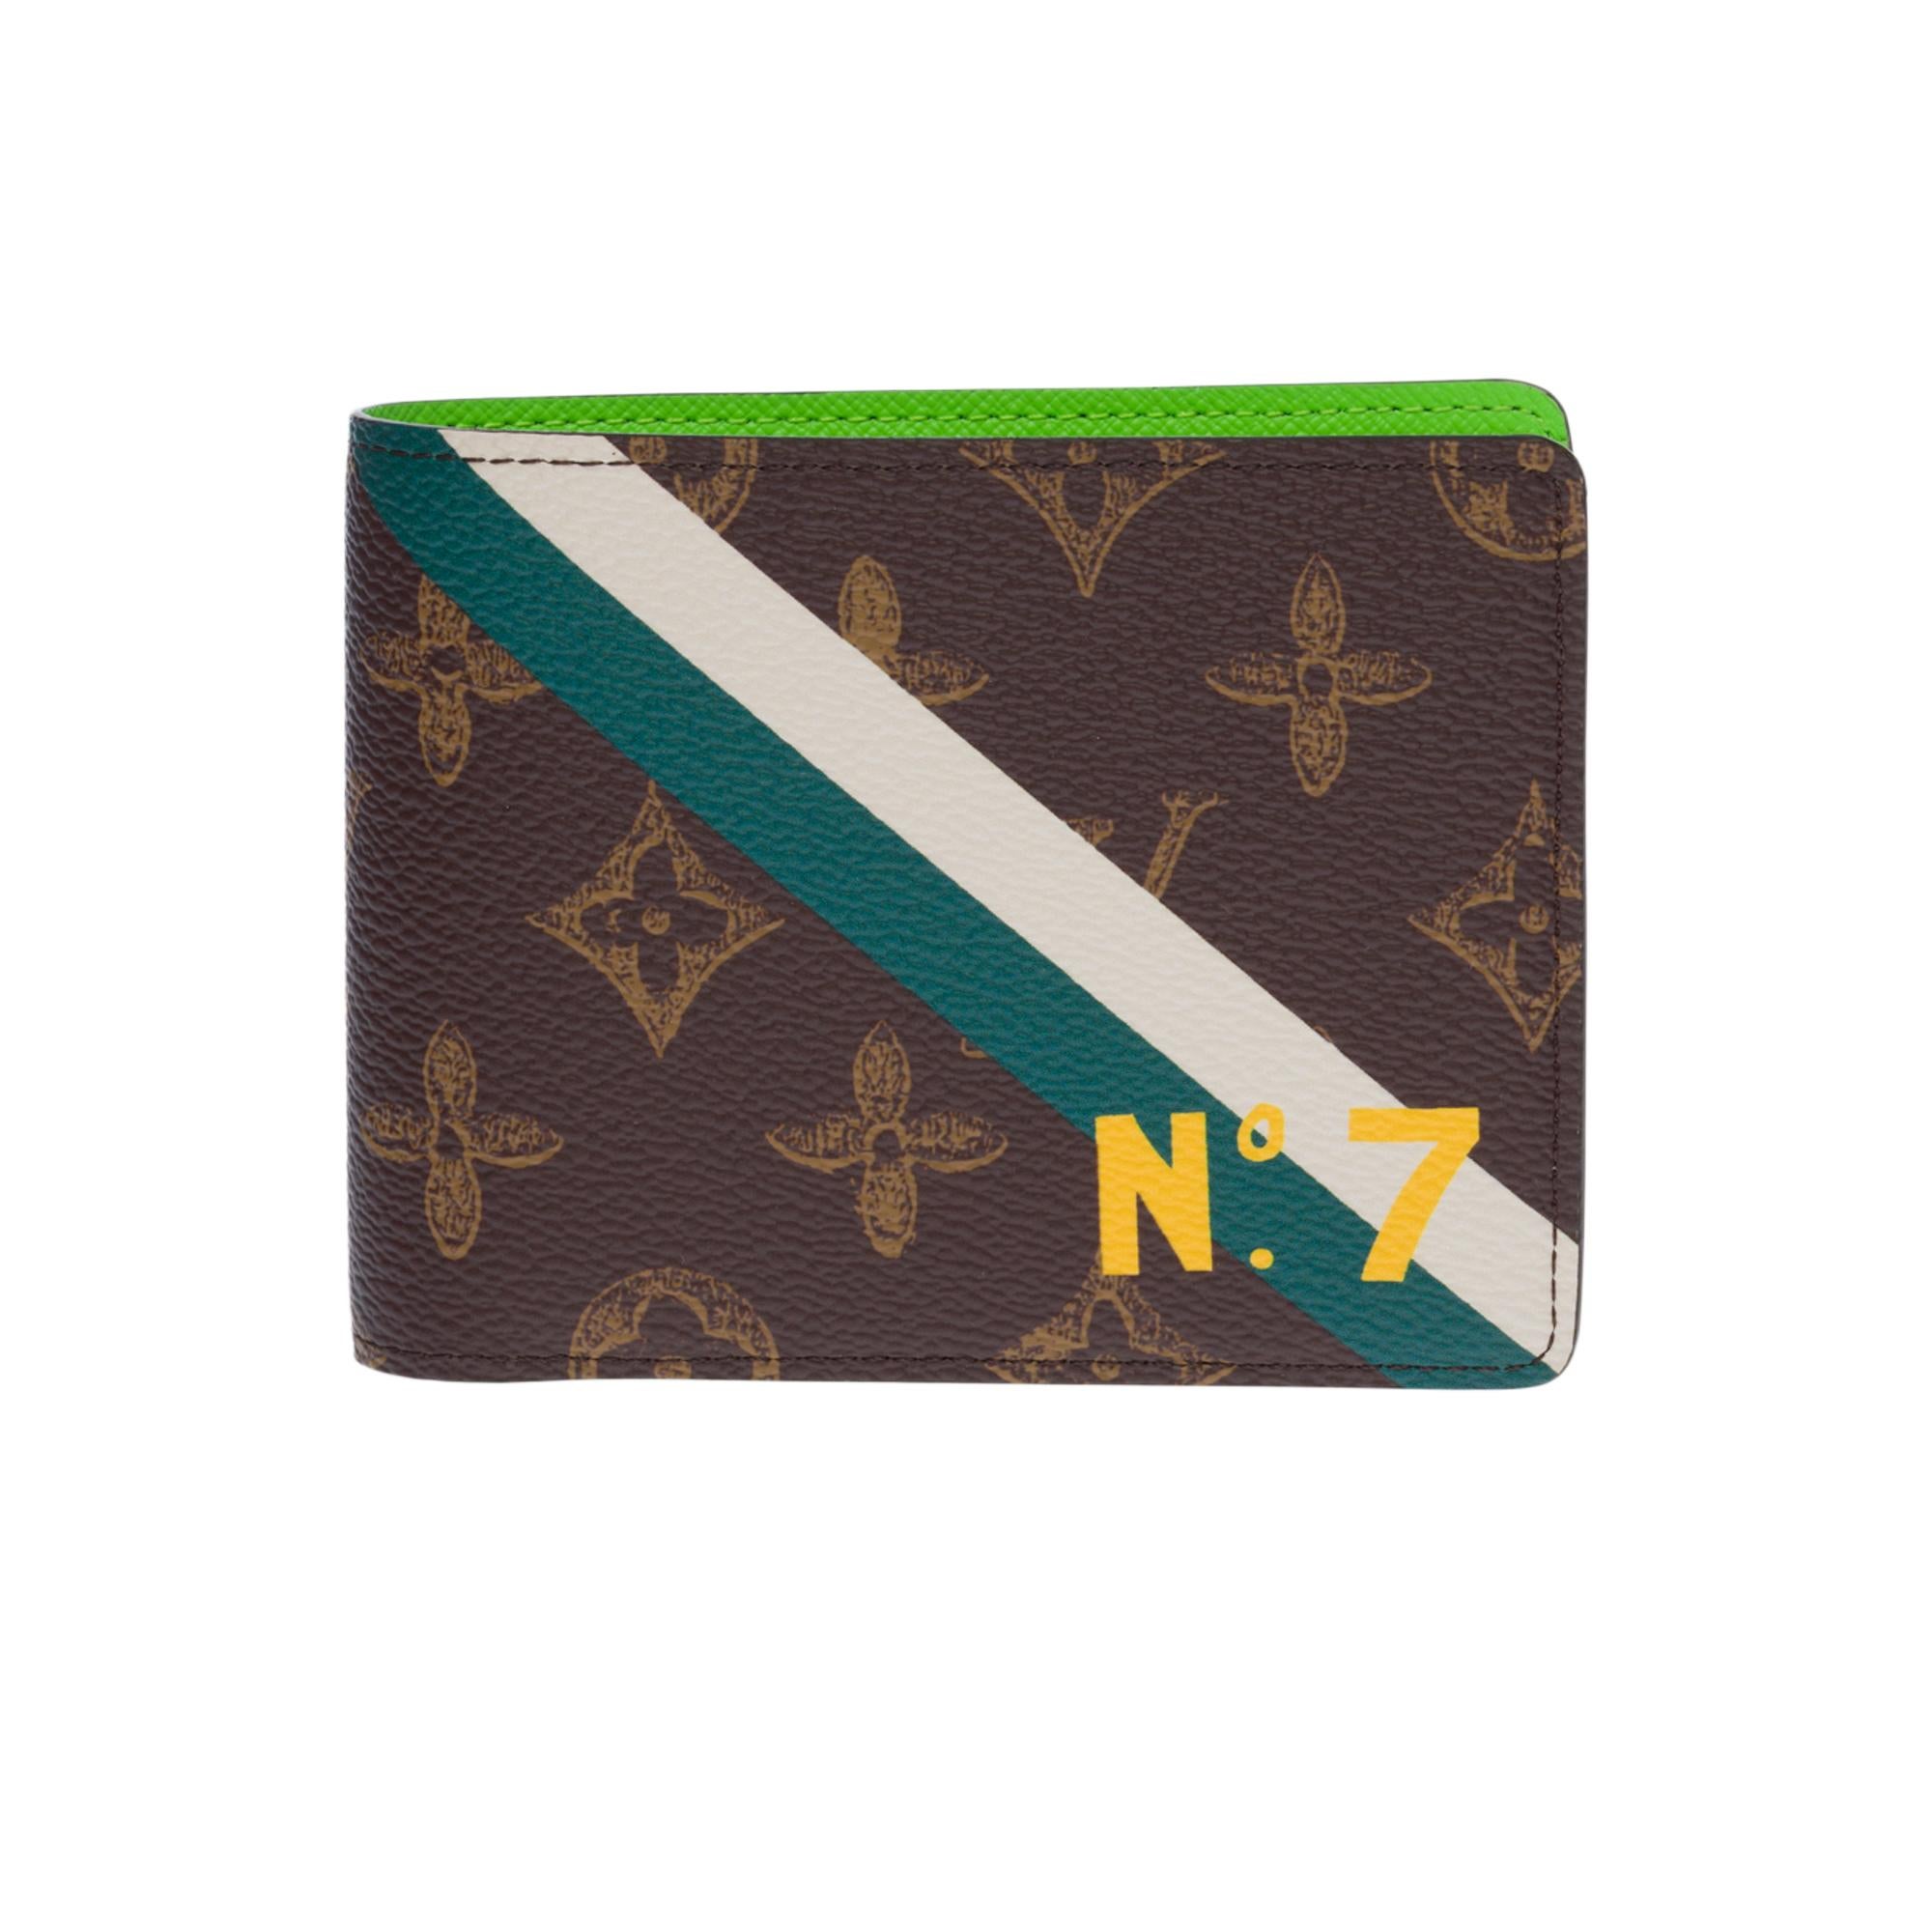 Based on Virgil Abloh's Trunk L'Œil theme, this Multiple wallet is made from traditional Monogram canvas with a slight variation: the pattern has an irregular appearance that gives it a vintage feel. The fluorescent lining gives it a modern look.